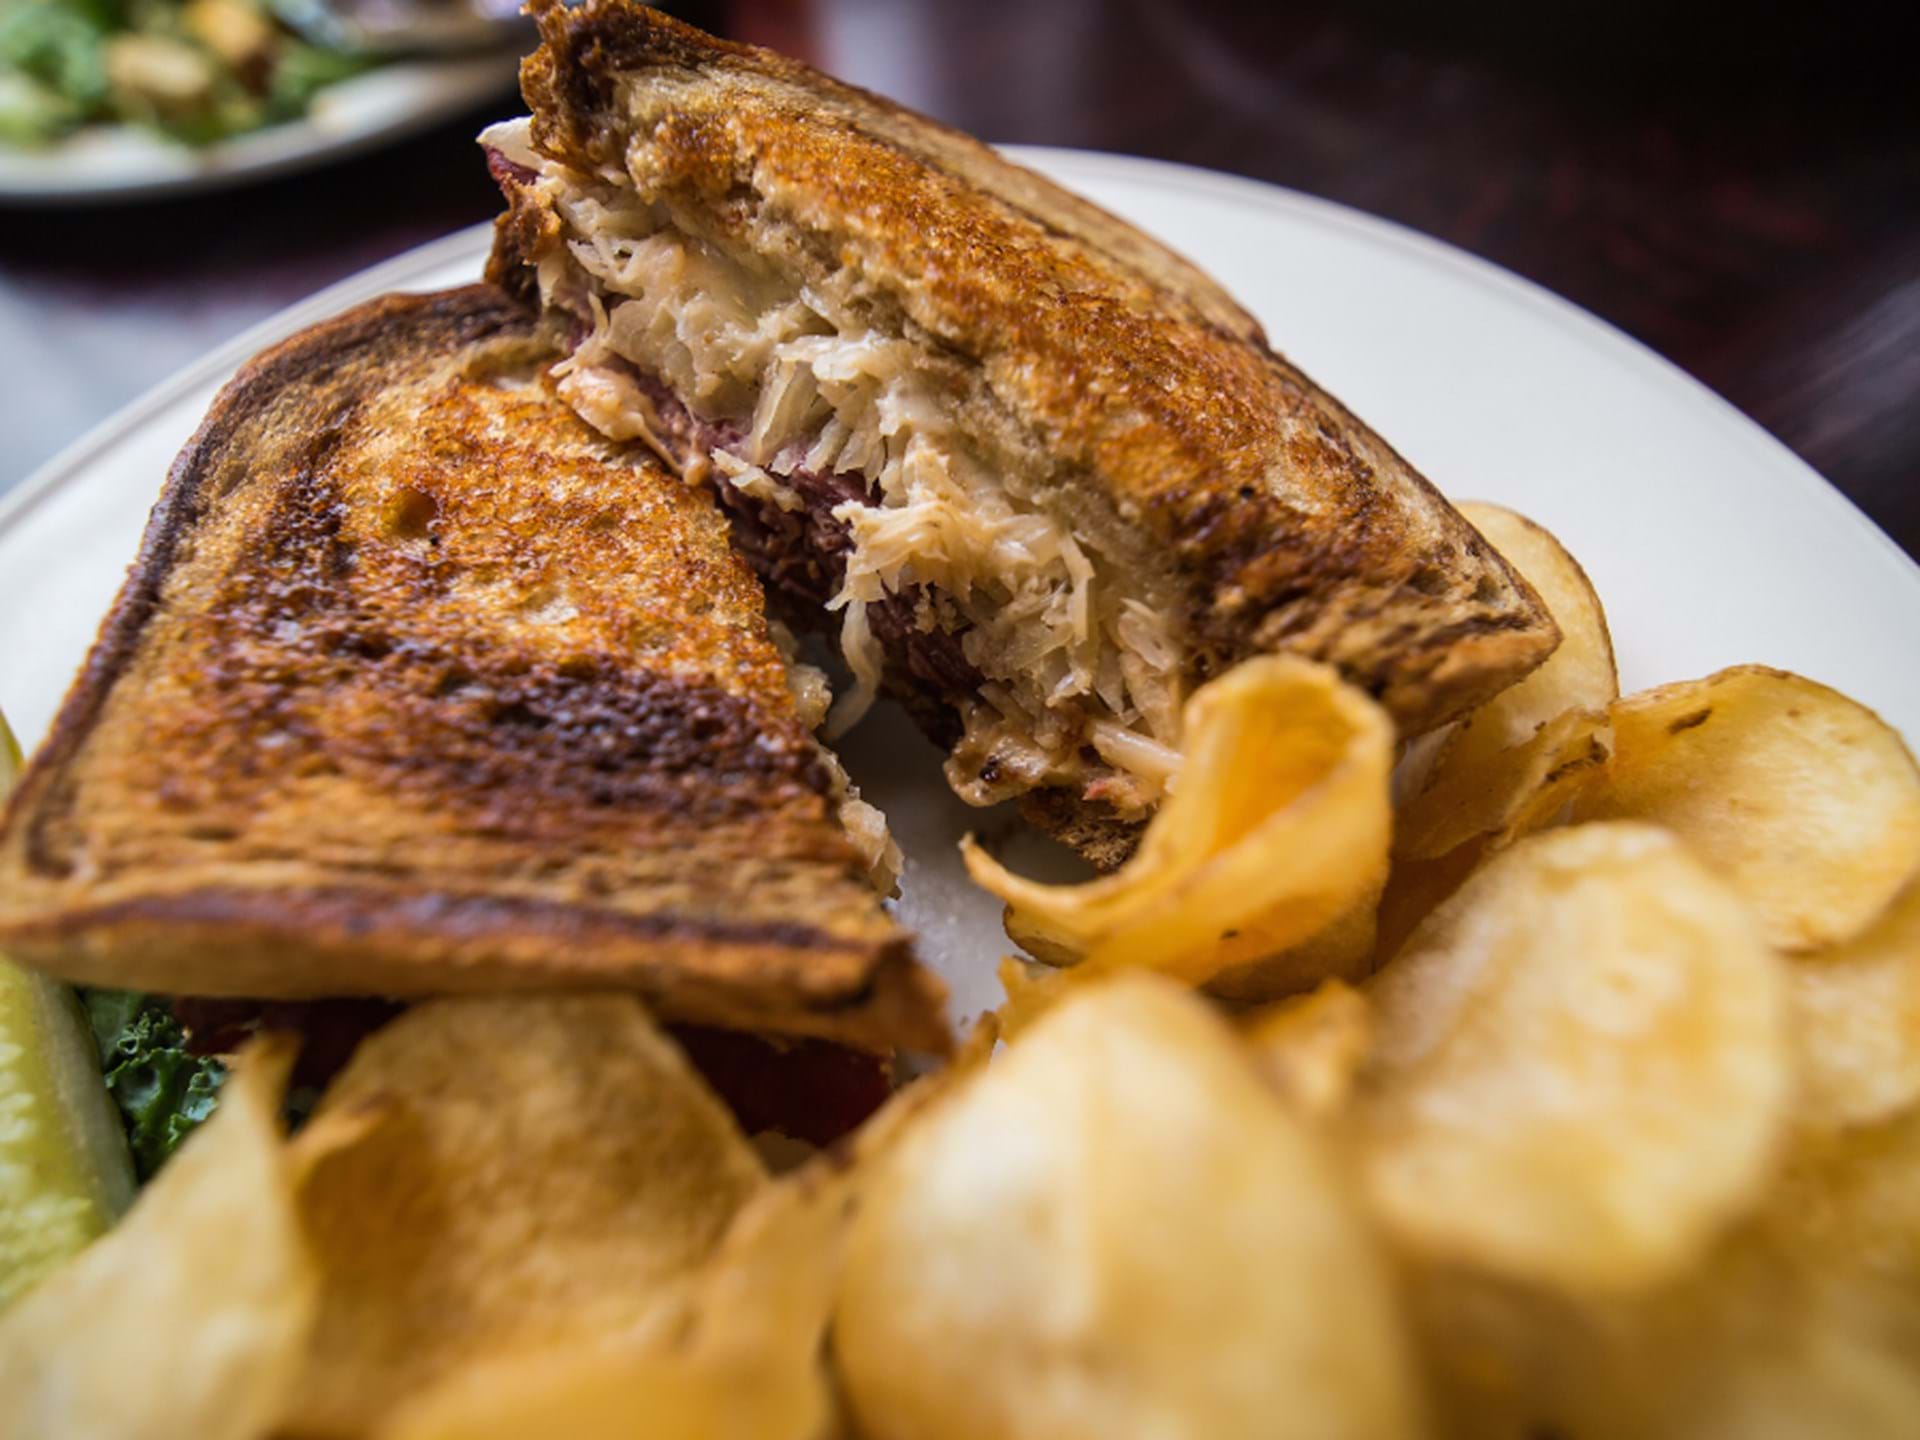 Our lunch guests love our classic Reuben